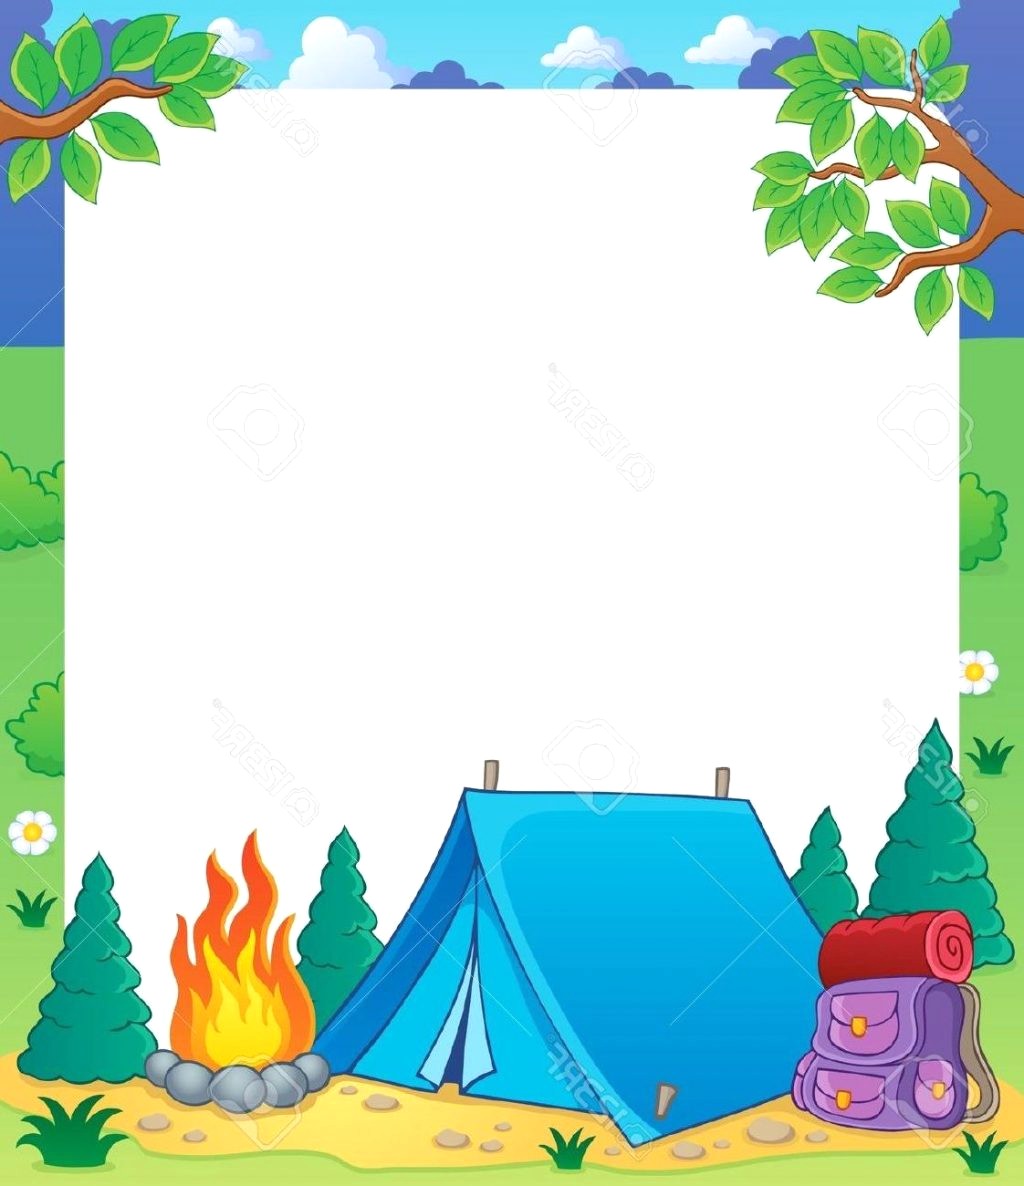 Camping clipart border clipart images gallery for free